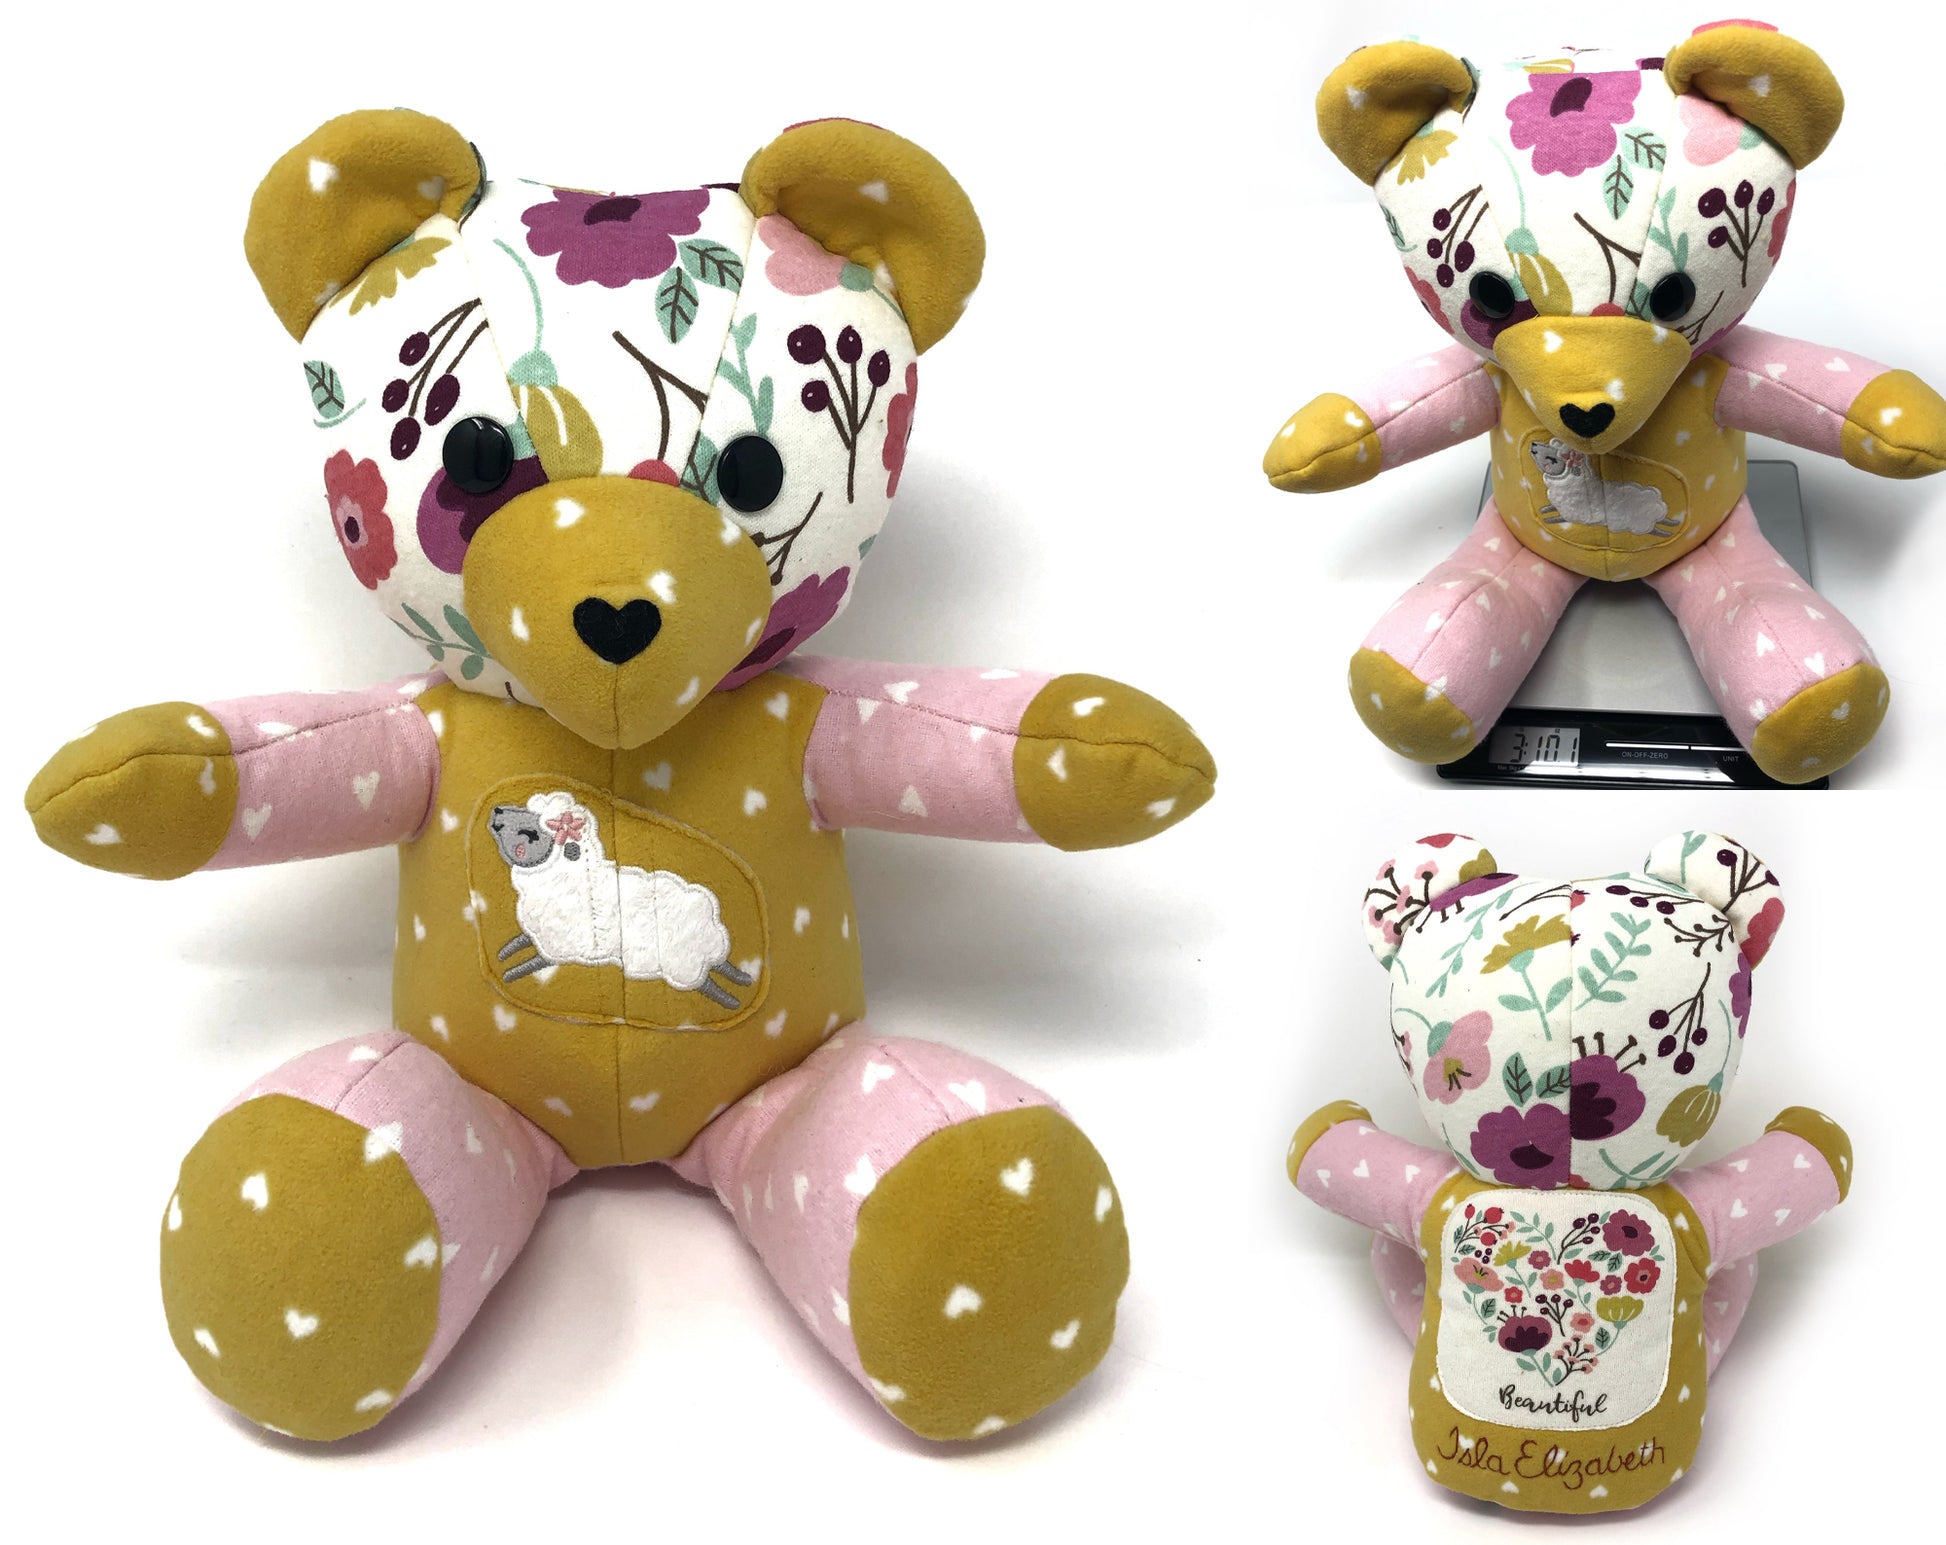 21 Handmade Memory Bear, Baby's First Outfit, In Loving Memory Of